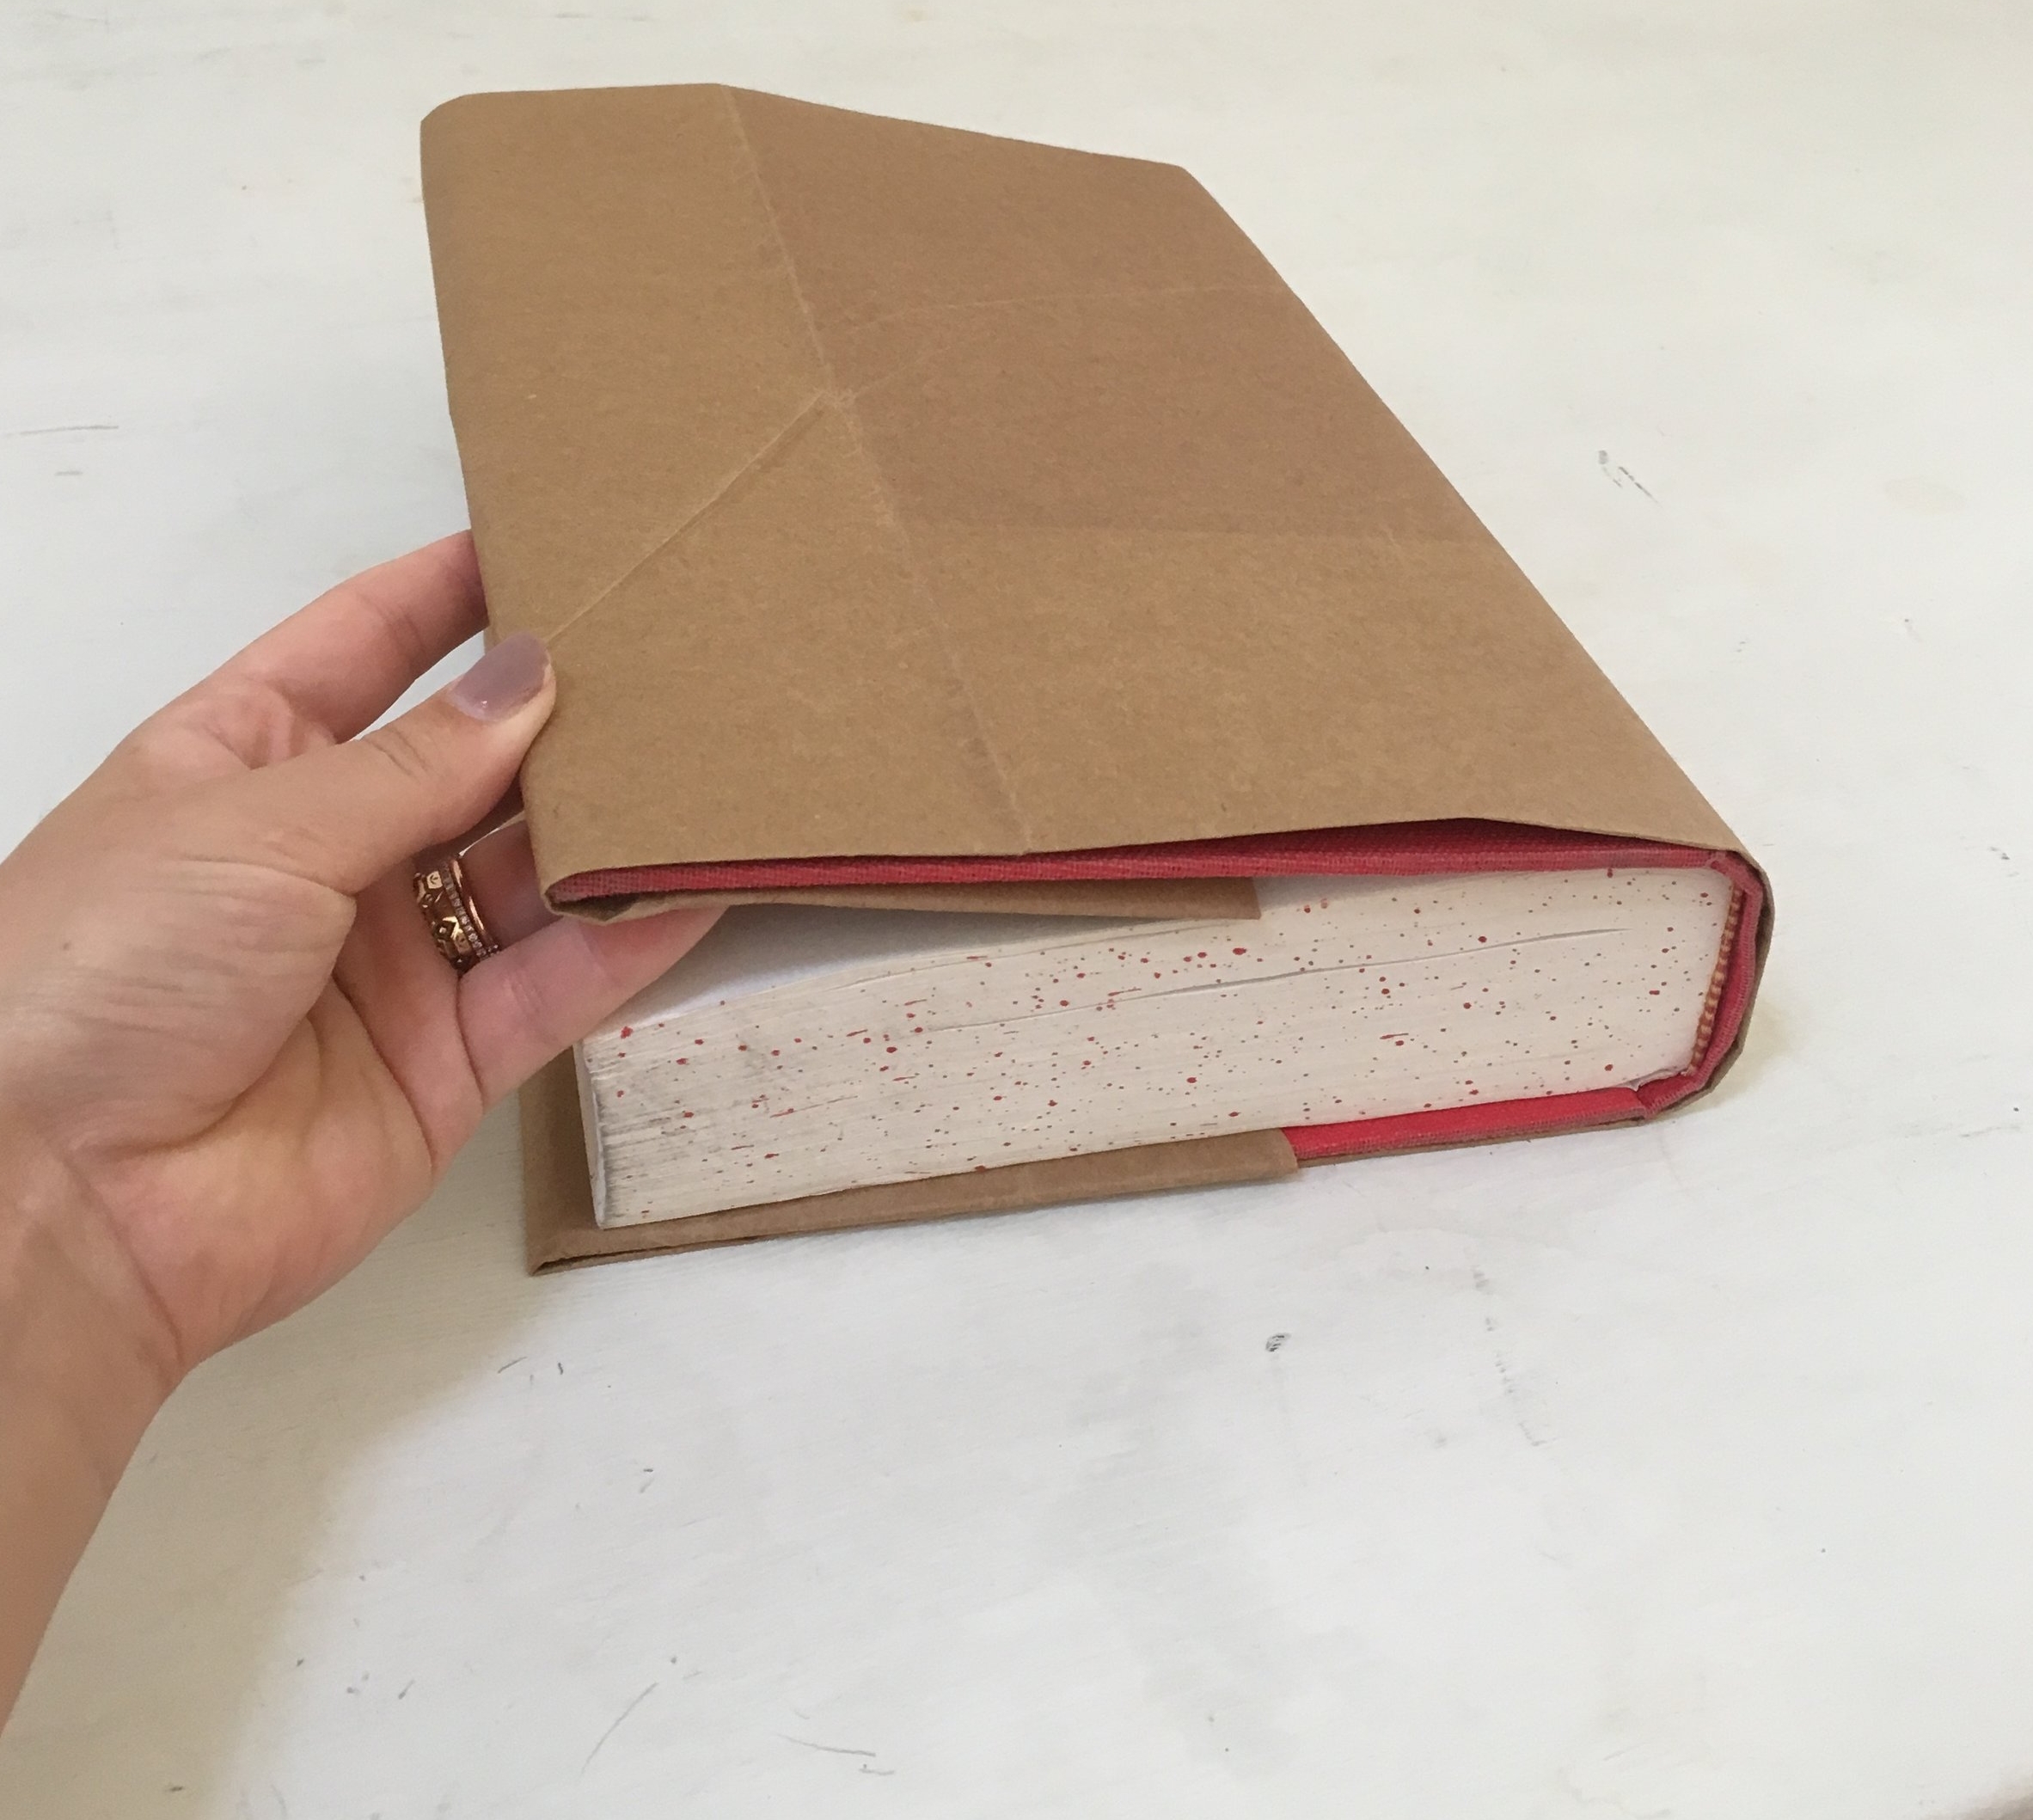 How to make a book cover from a paper grocery Sack. — Ross